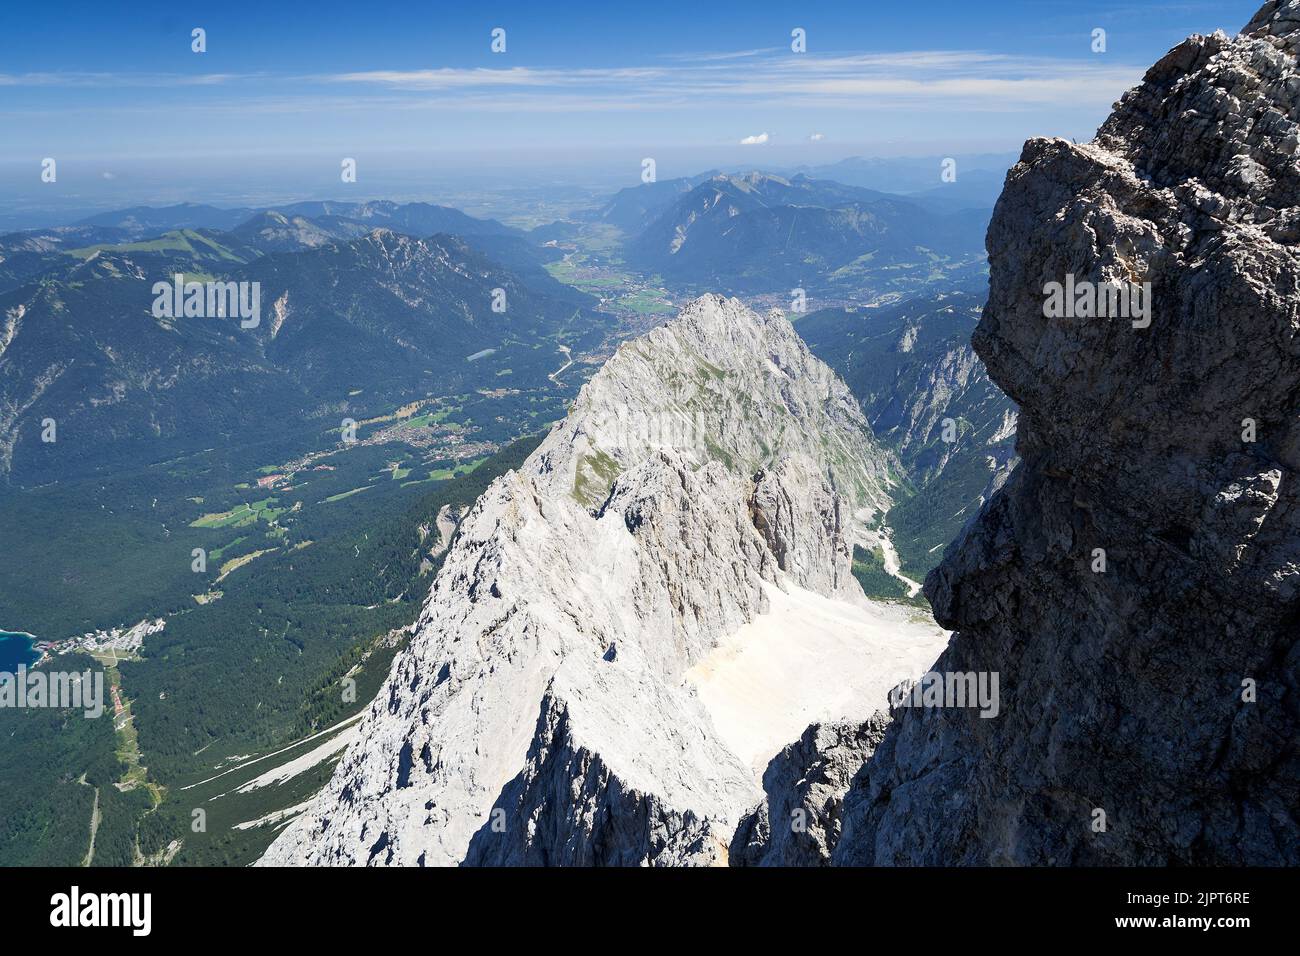 View on the high alp mountains, blue sky with a little clouds. Mountain ridge in the middle. Stock Photo